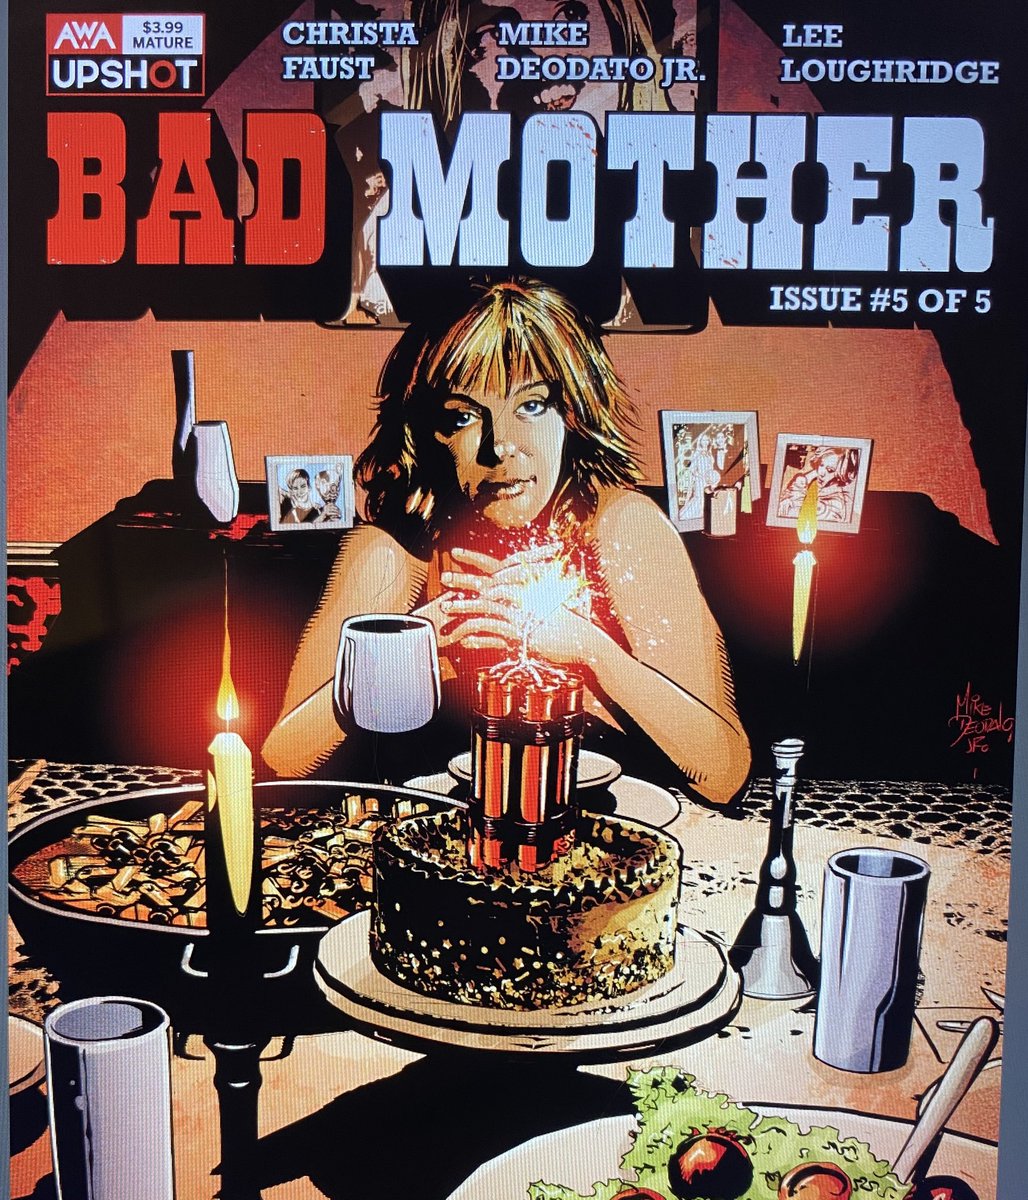 Great book to finish the night - I flew through the rest of BAD MOTHER-and April definitely  is all that and more-w/action and excitement-great characters overcoming the odds-good beats evil-what else can I ask for @faustfatale @mikedeodato @leeloughridge @dezicnt @AWA_Studios